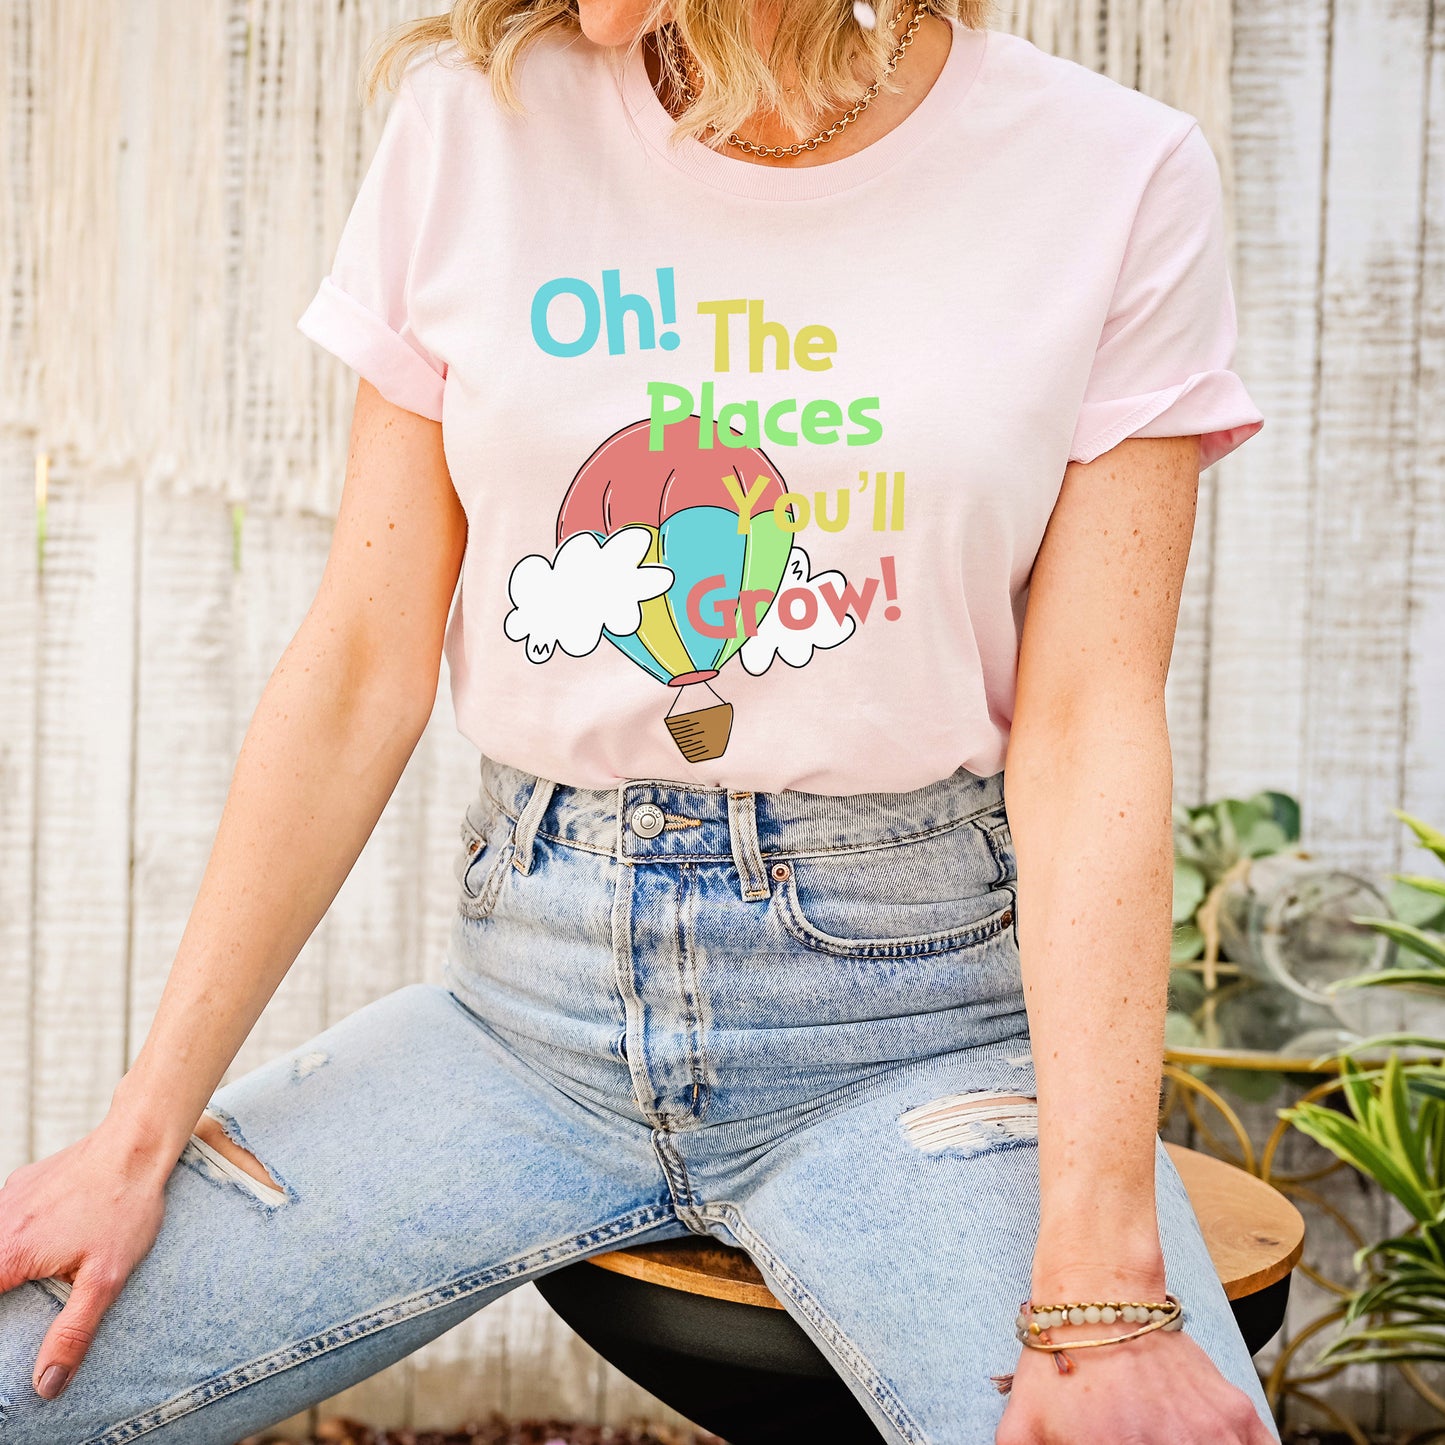 Oh the Places You'll Grow Ultra Soft Graphic Tee Unisex Soft Tee T-shirt for Women or Men